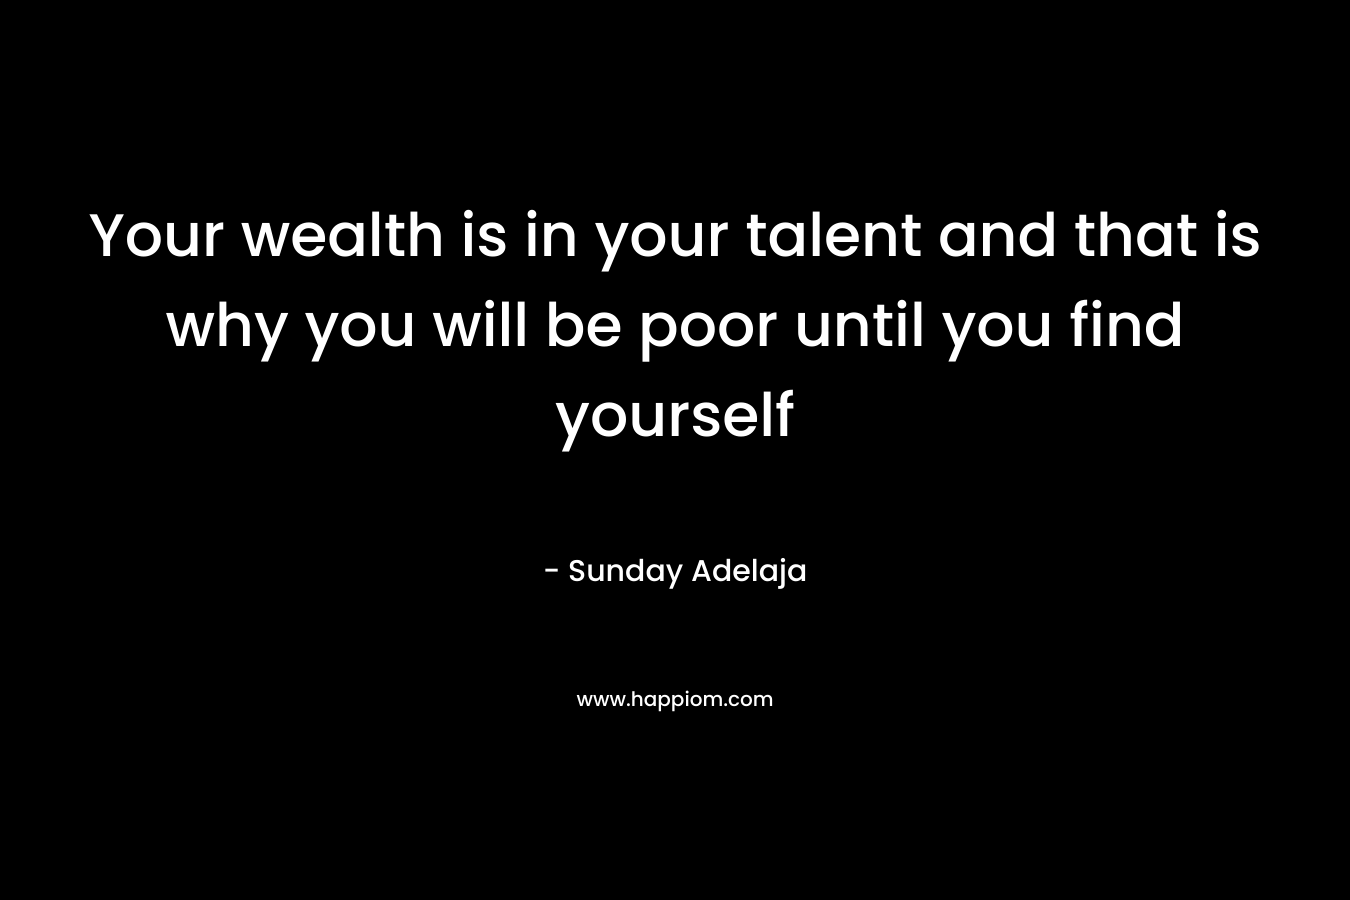 Your wealth is in your talent and that is why you will be poor until you find yourself